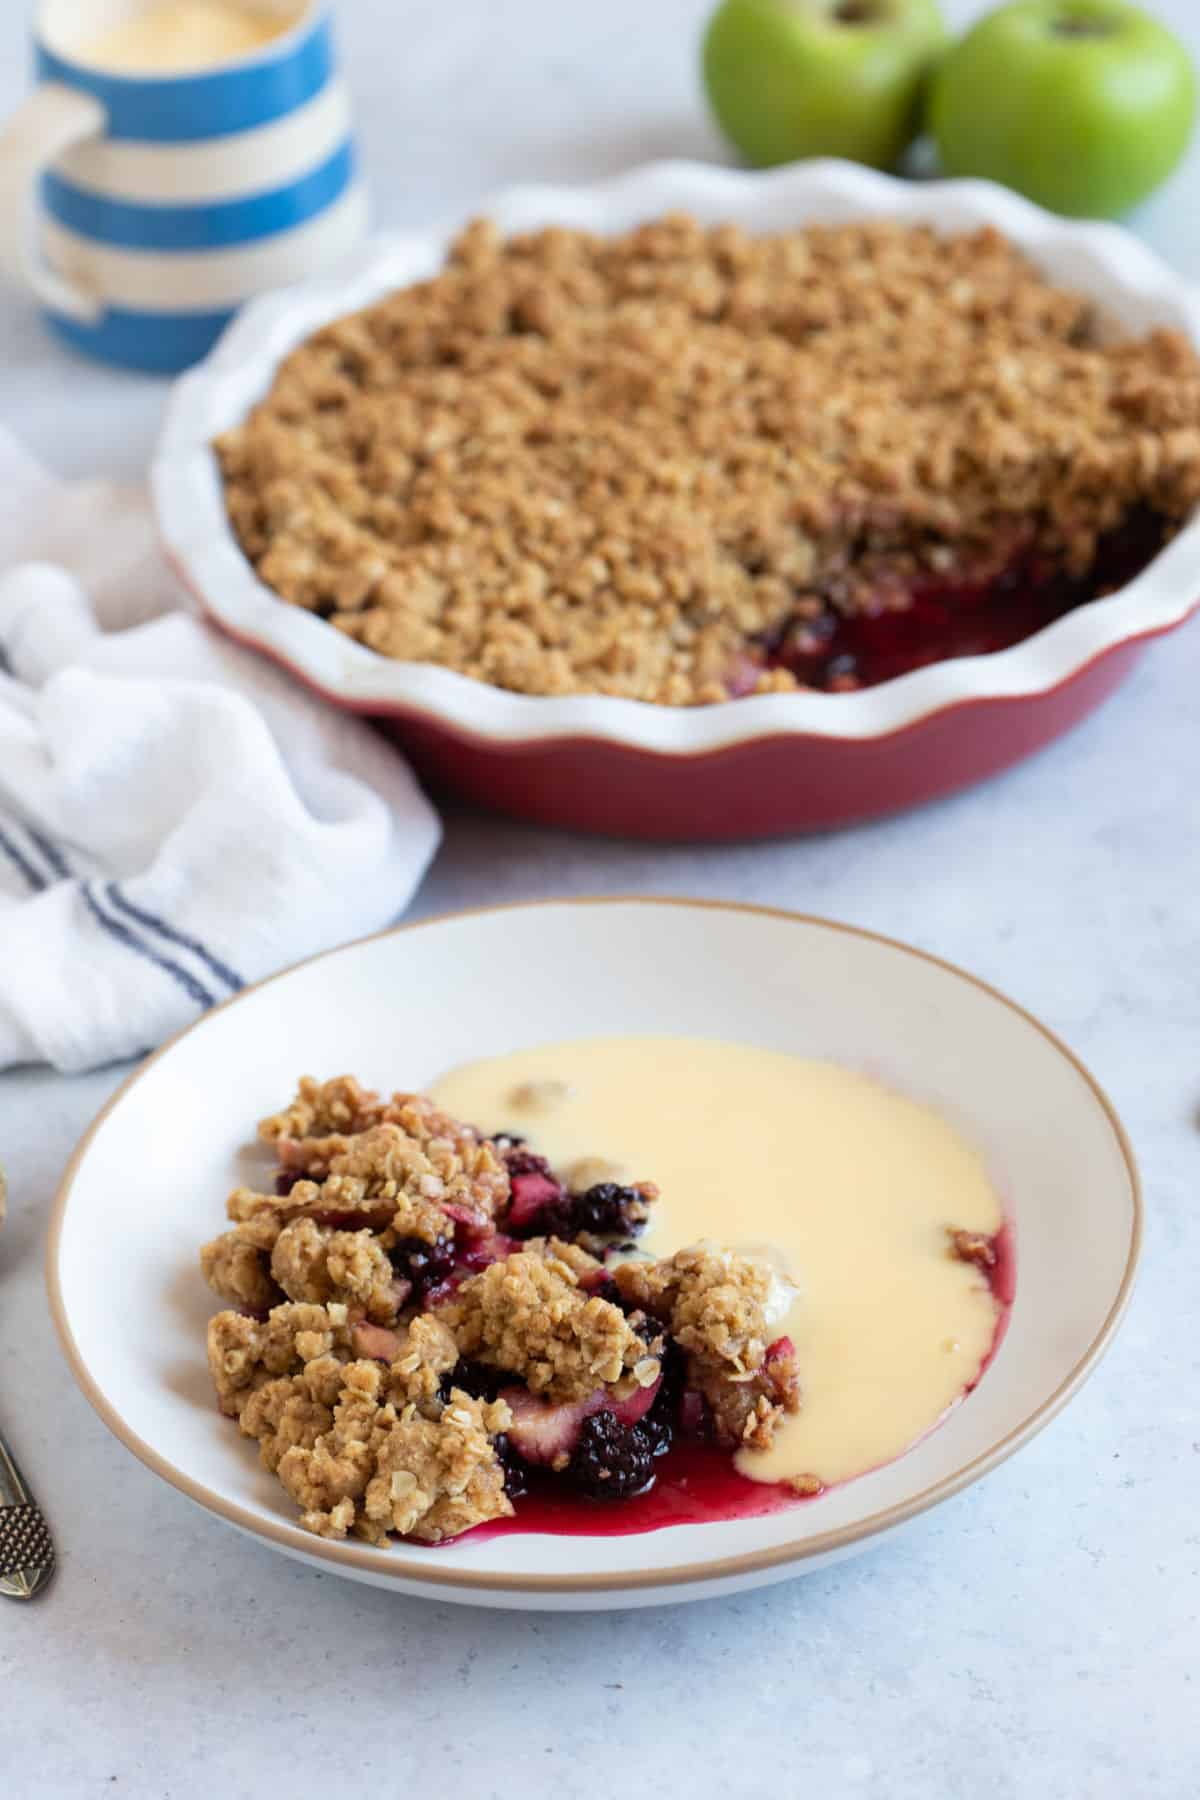 A bowl of blackberry and apple crumble with custard.